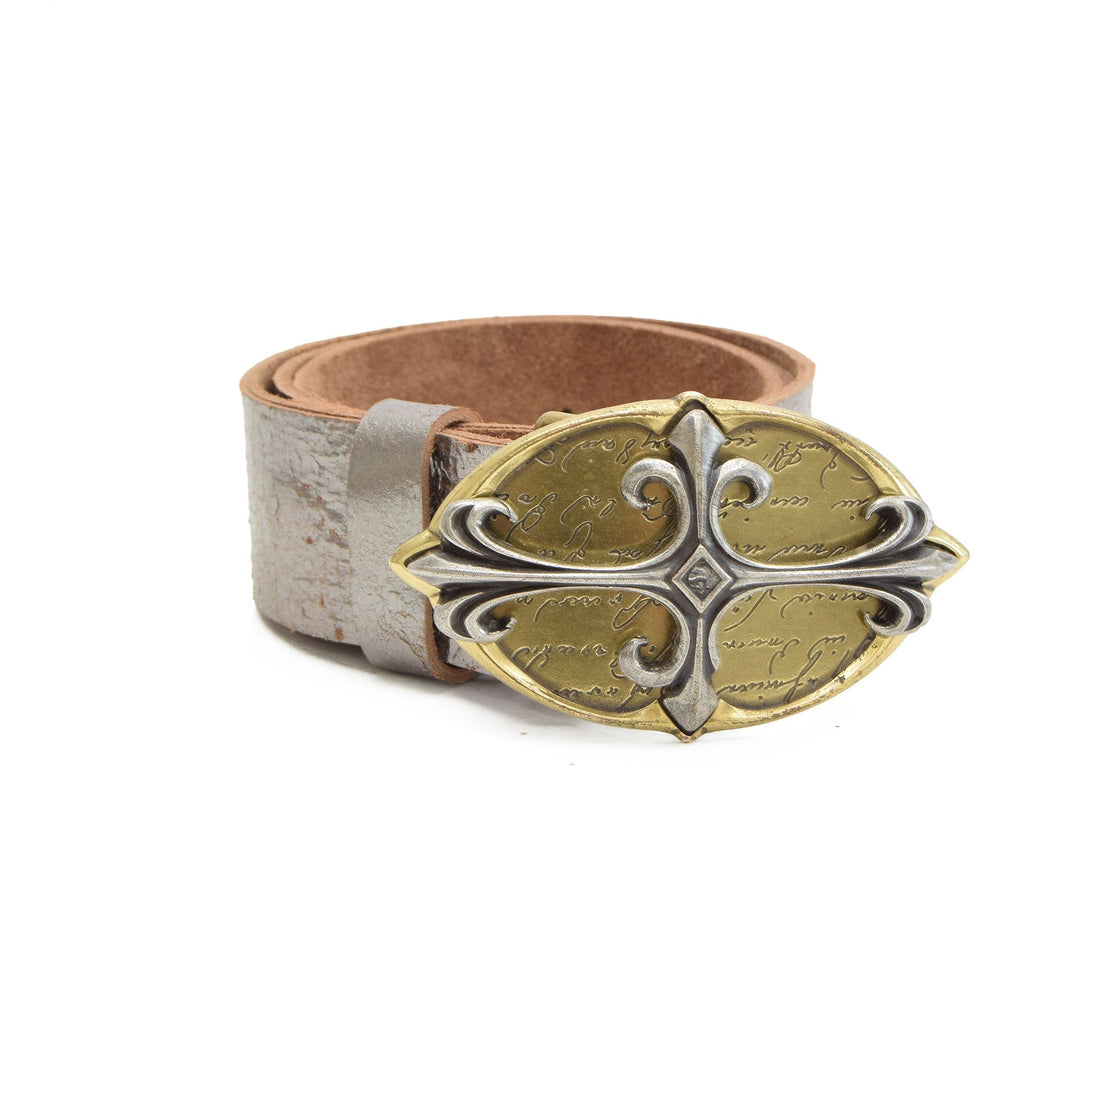 Ethereal Leather Belt Silver with Changeable Buckle - 80 - Belts Zengoda Shop online from Artisan Brands